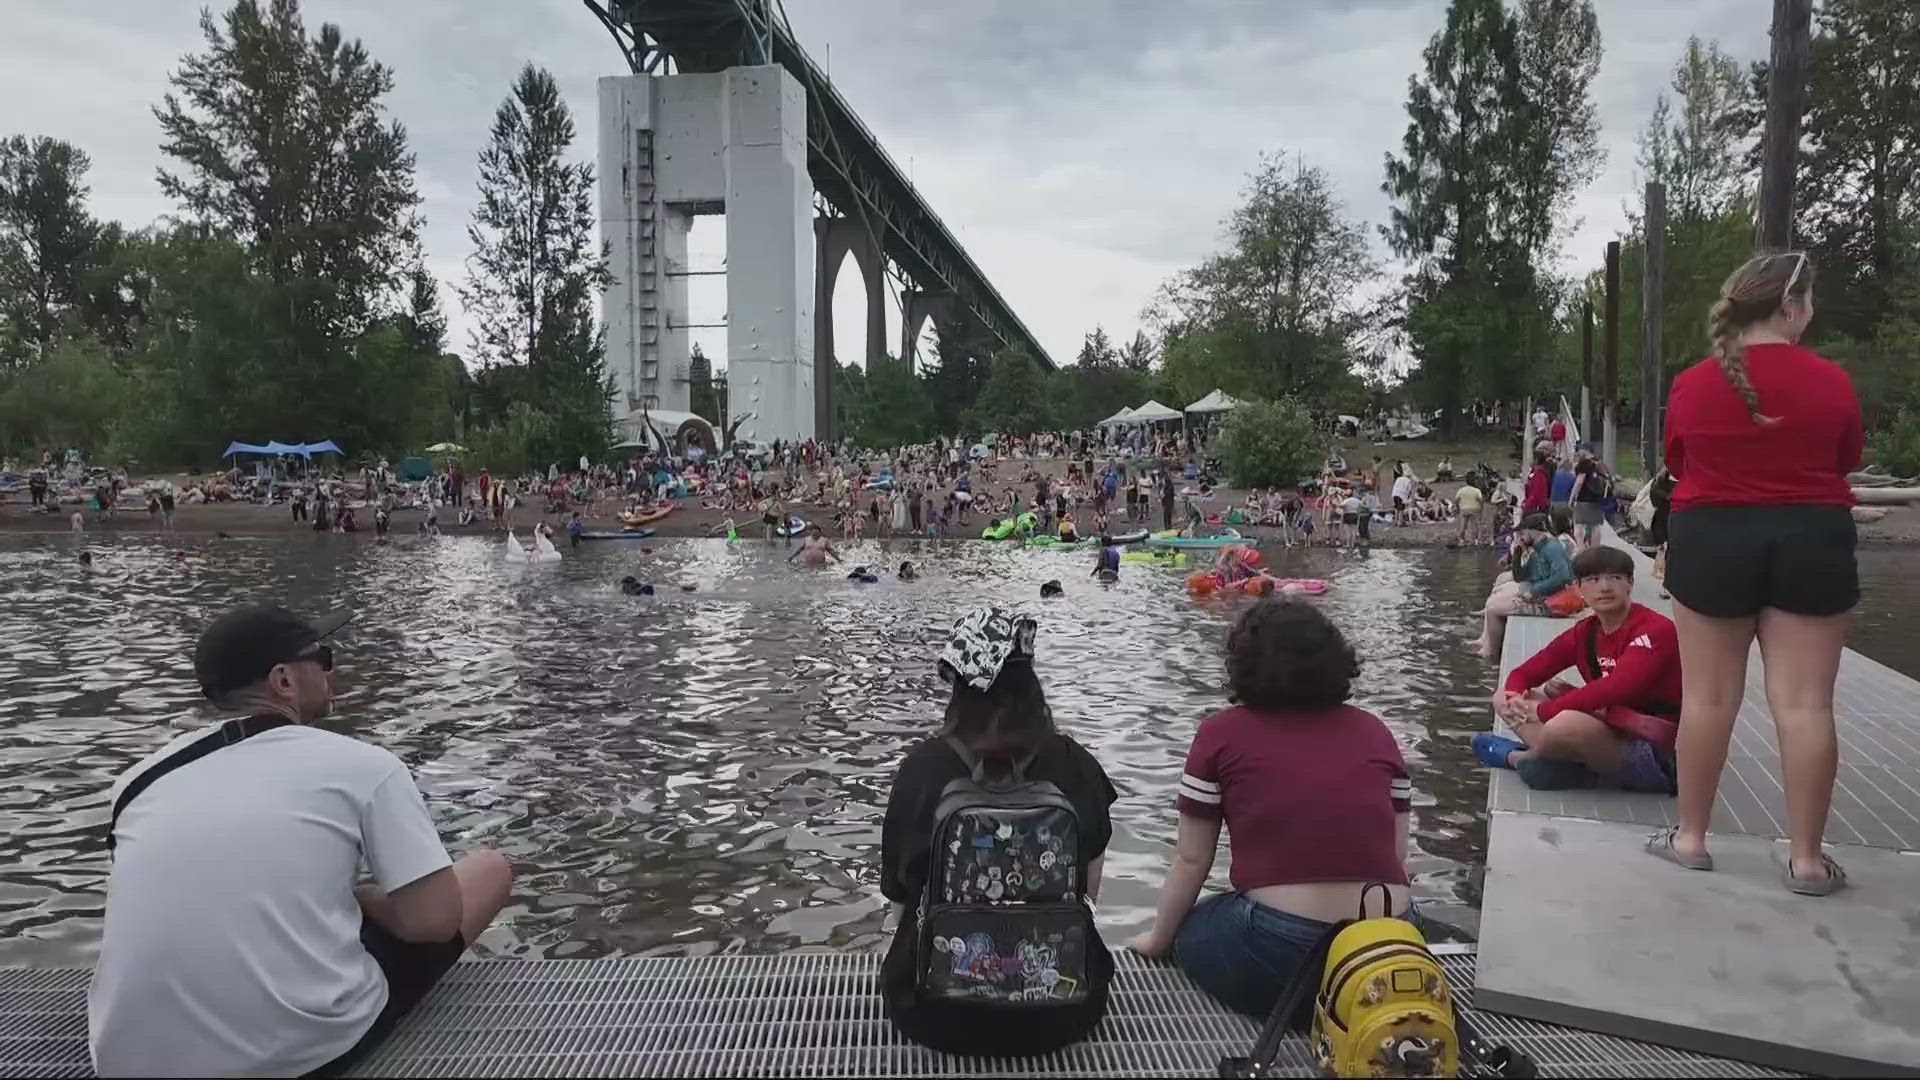 A new place to swim and enjoy the Willamette River opened at Cathedral Park in the St. Johns neighborhood.